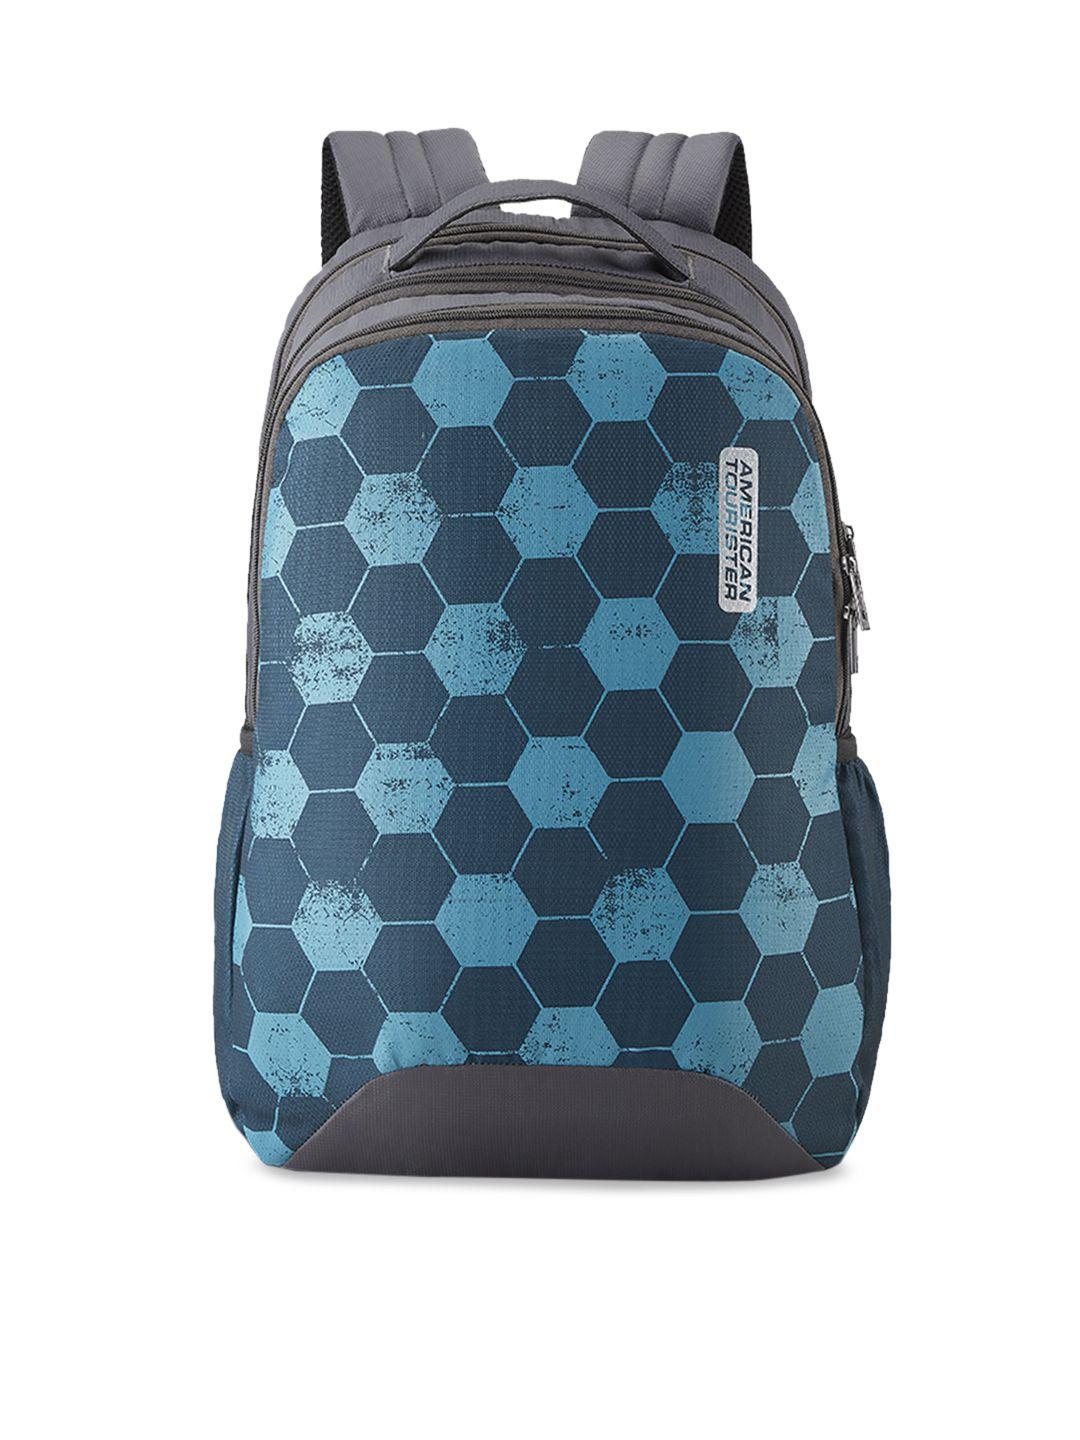 american tourister unisex blue & grey printed backpack